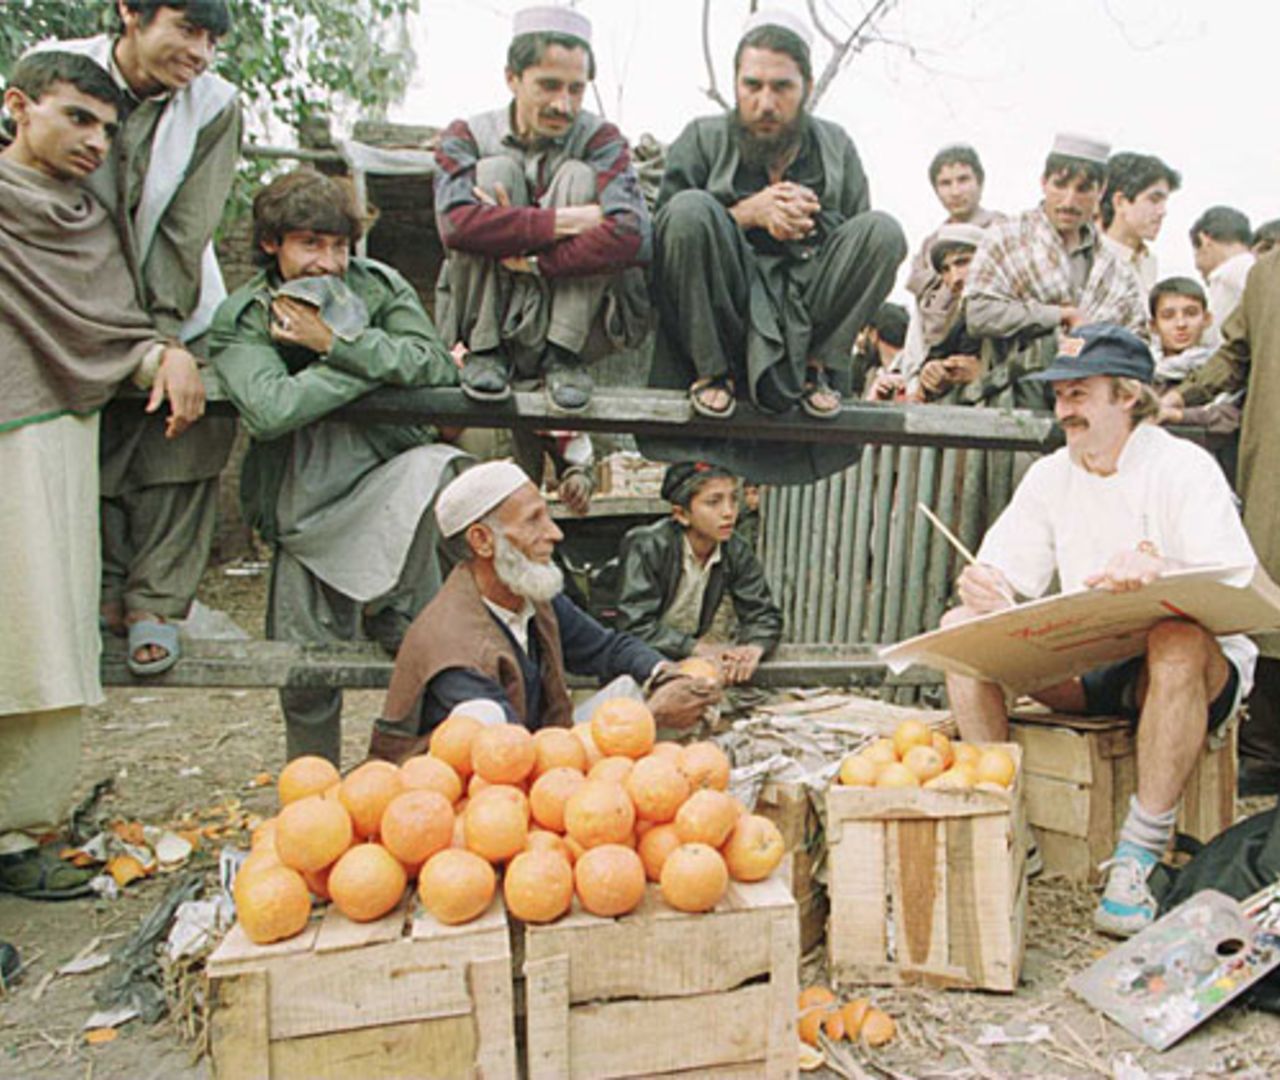 Jack Russell sketches at a bazaar, Peshawar, February 21, 1996